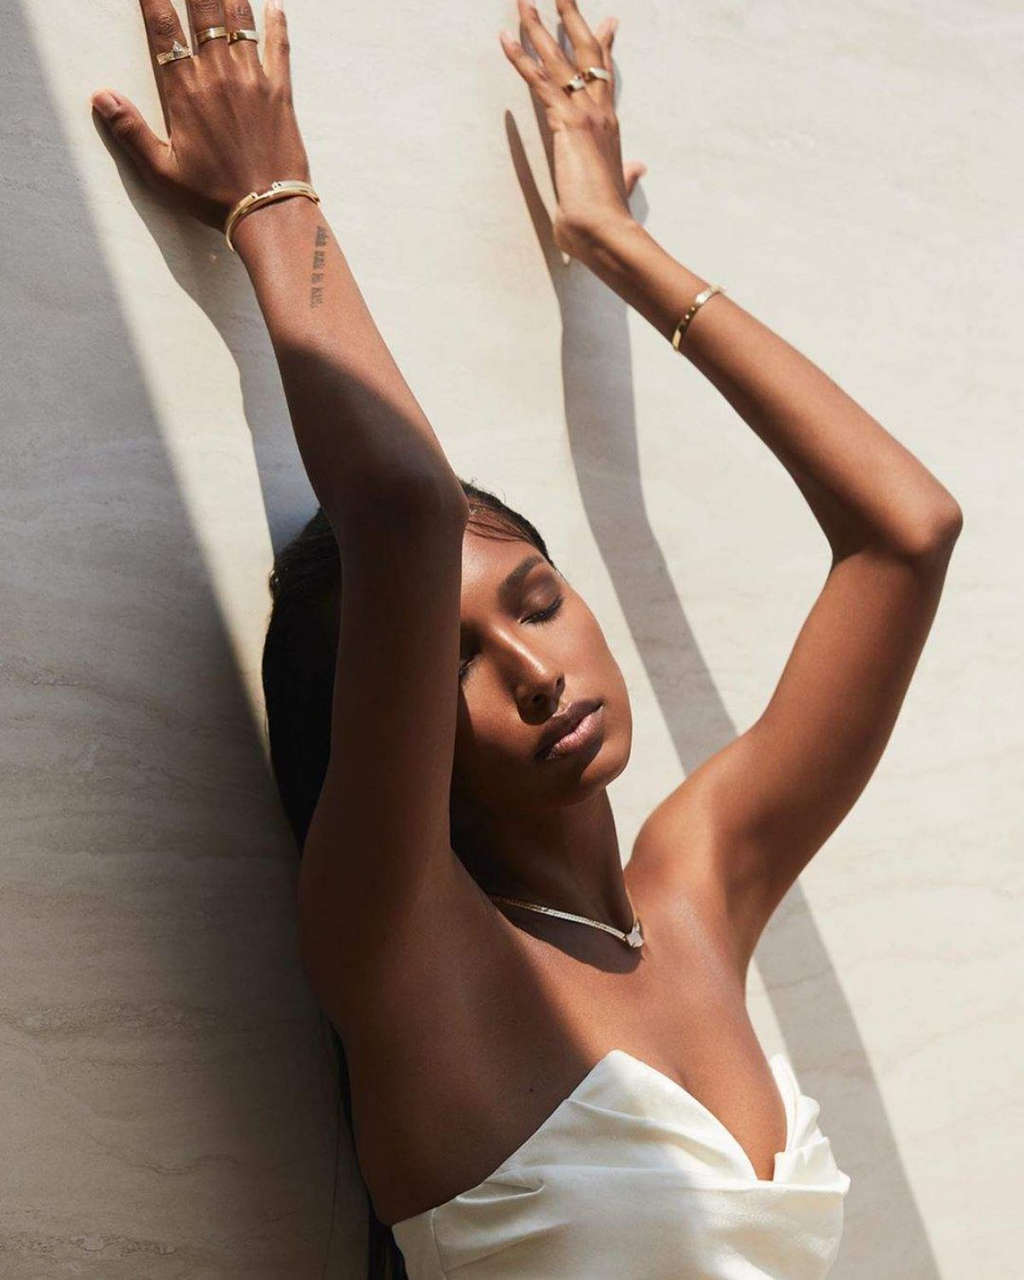 Jasmine Tookes For Gritty Magazine Spring